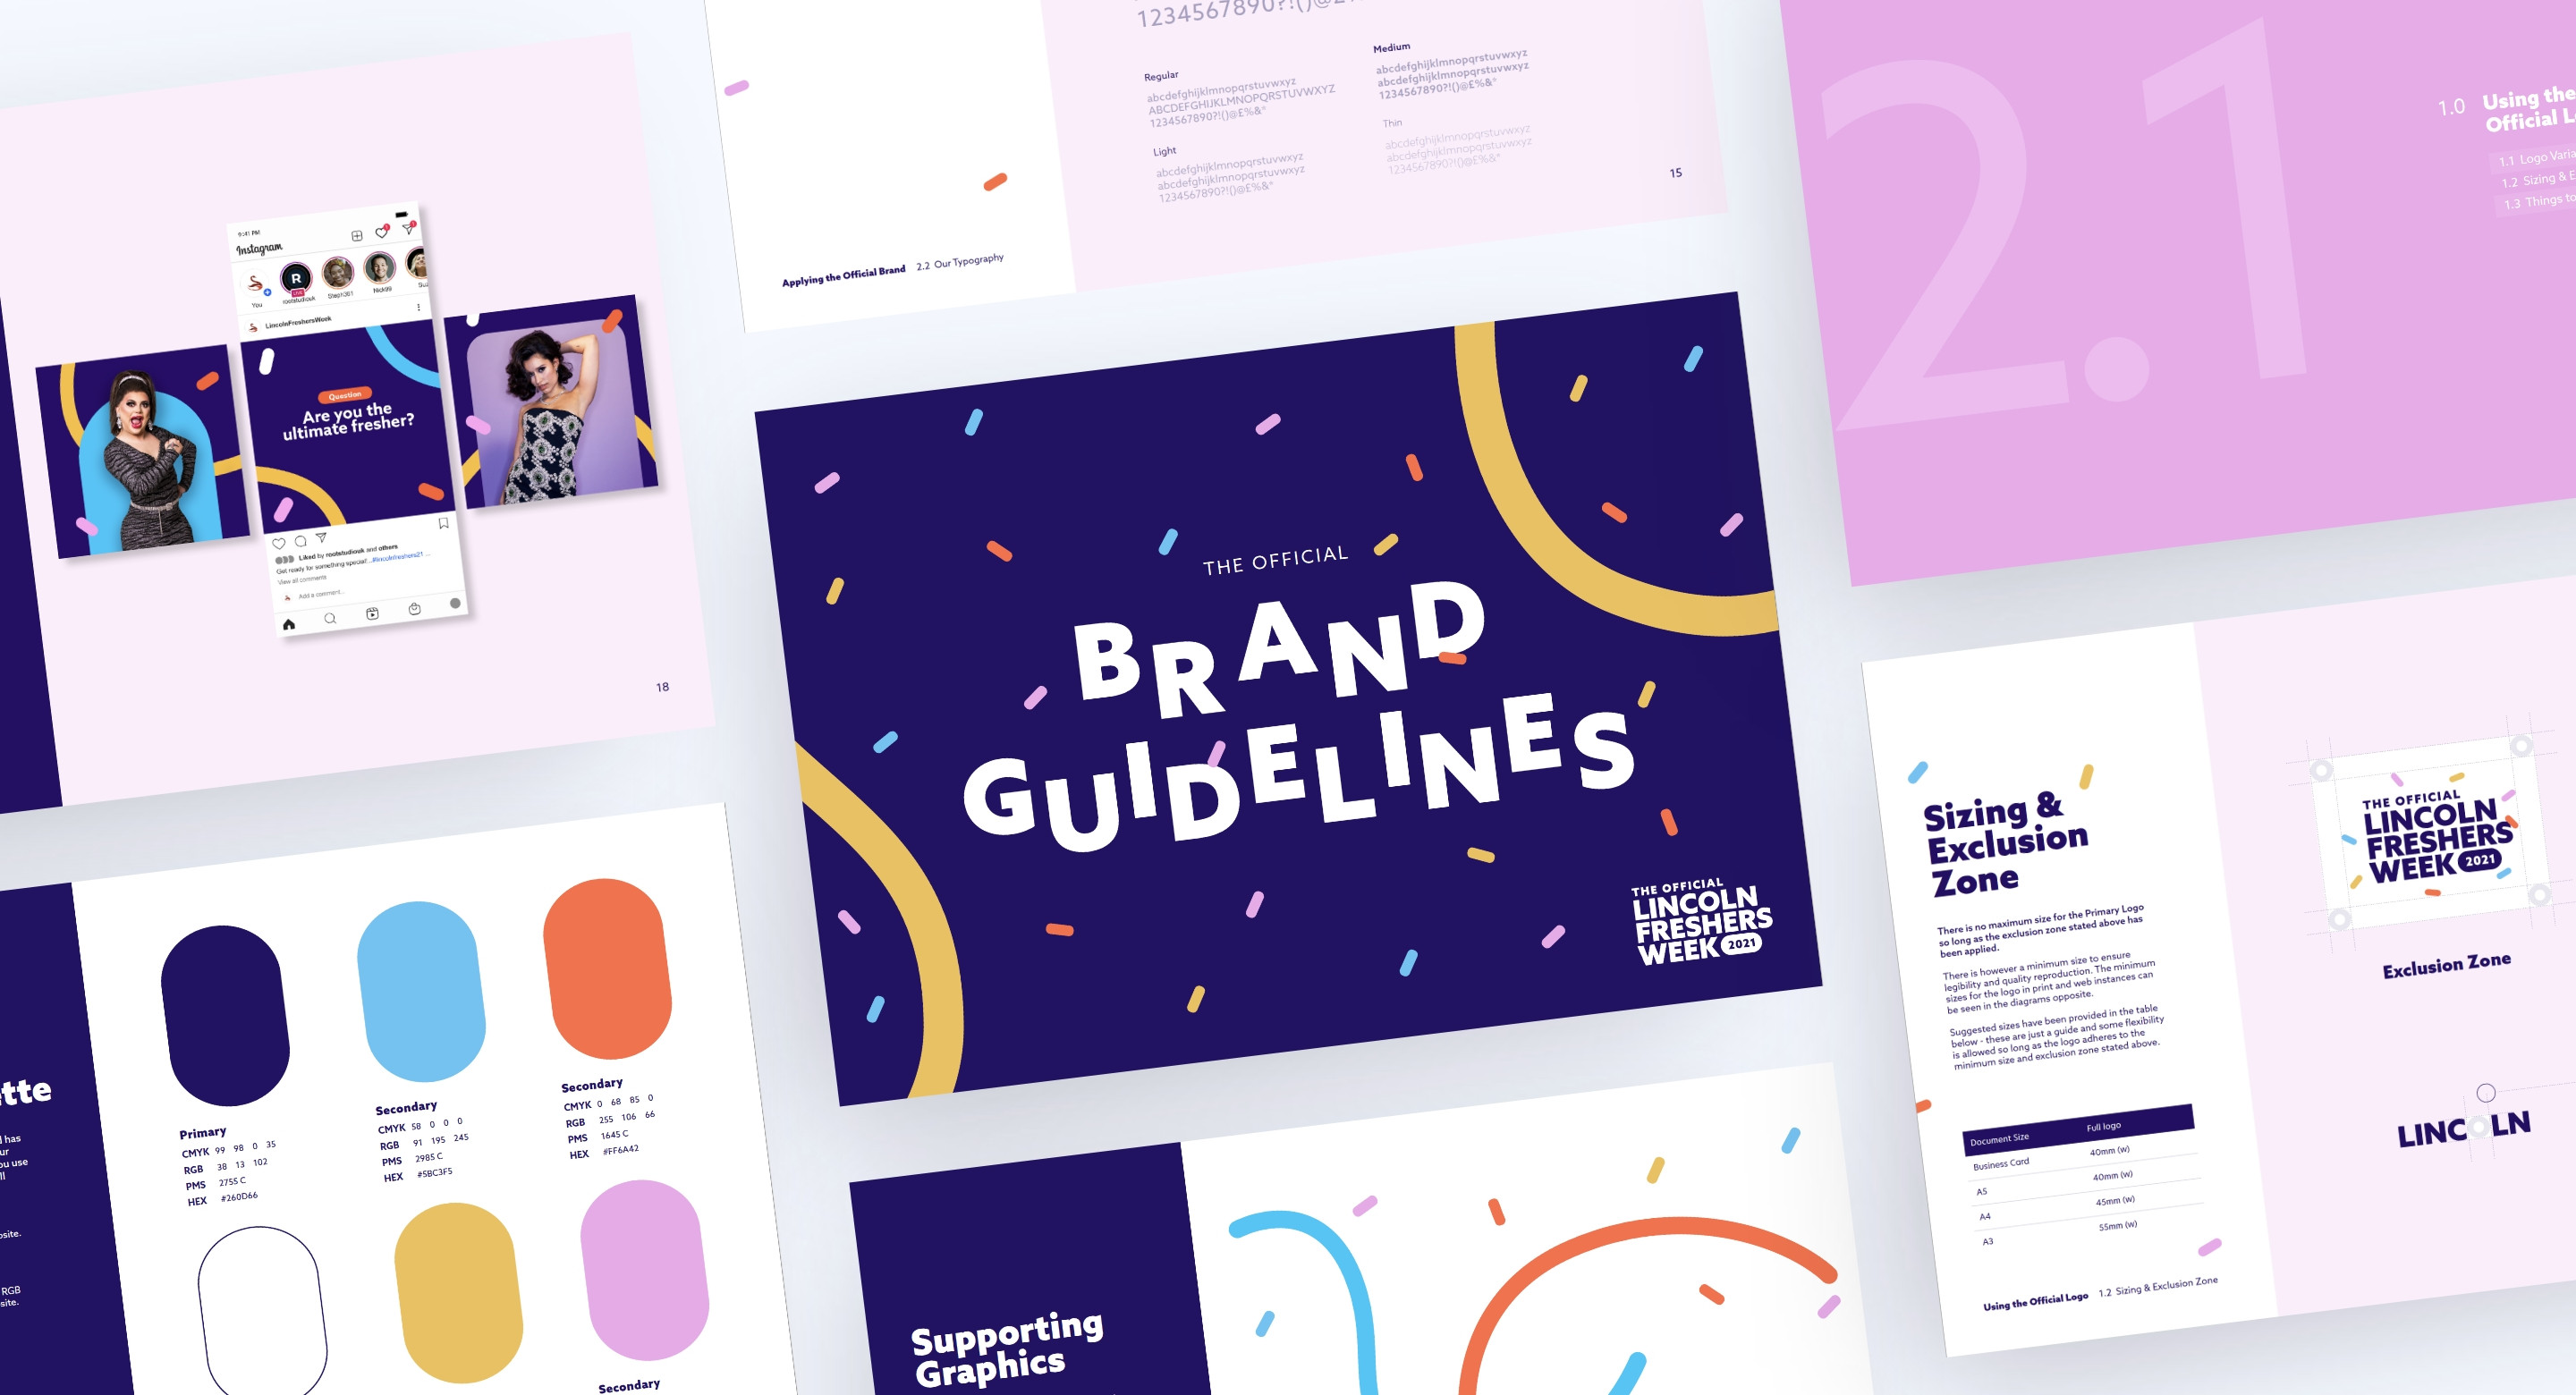 Brand guidelines document design by Root Studio